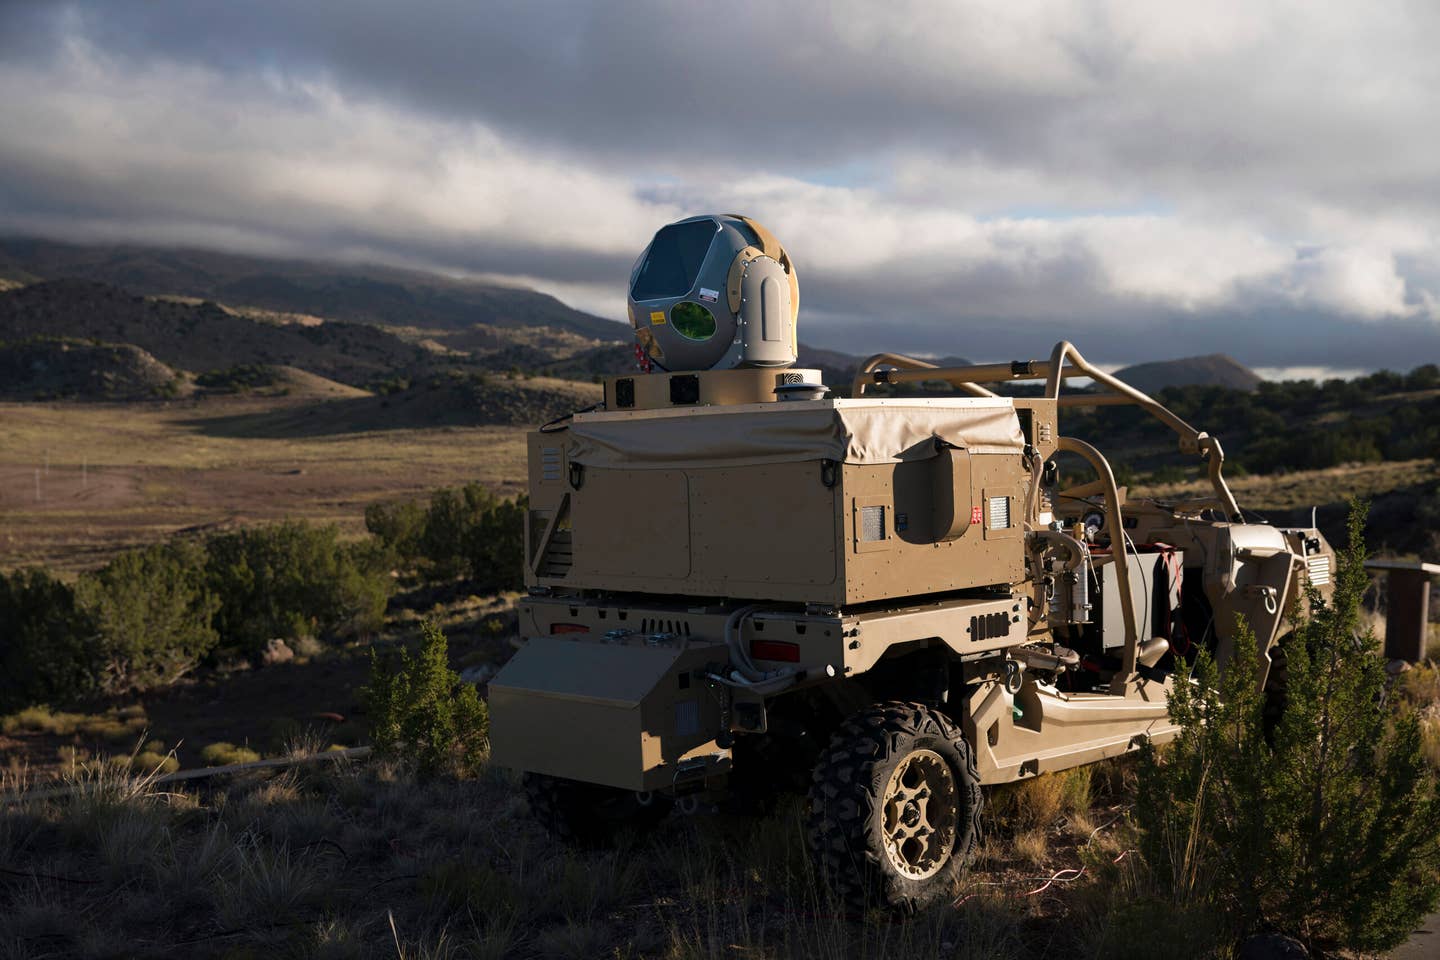 Production-Standard Laser Air Defense Weapons To Equip Army This Year